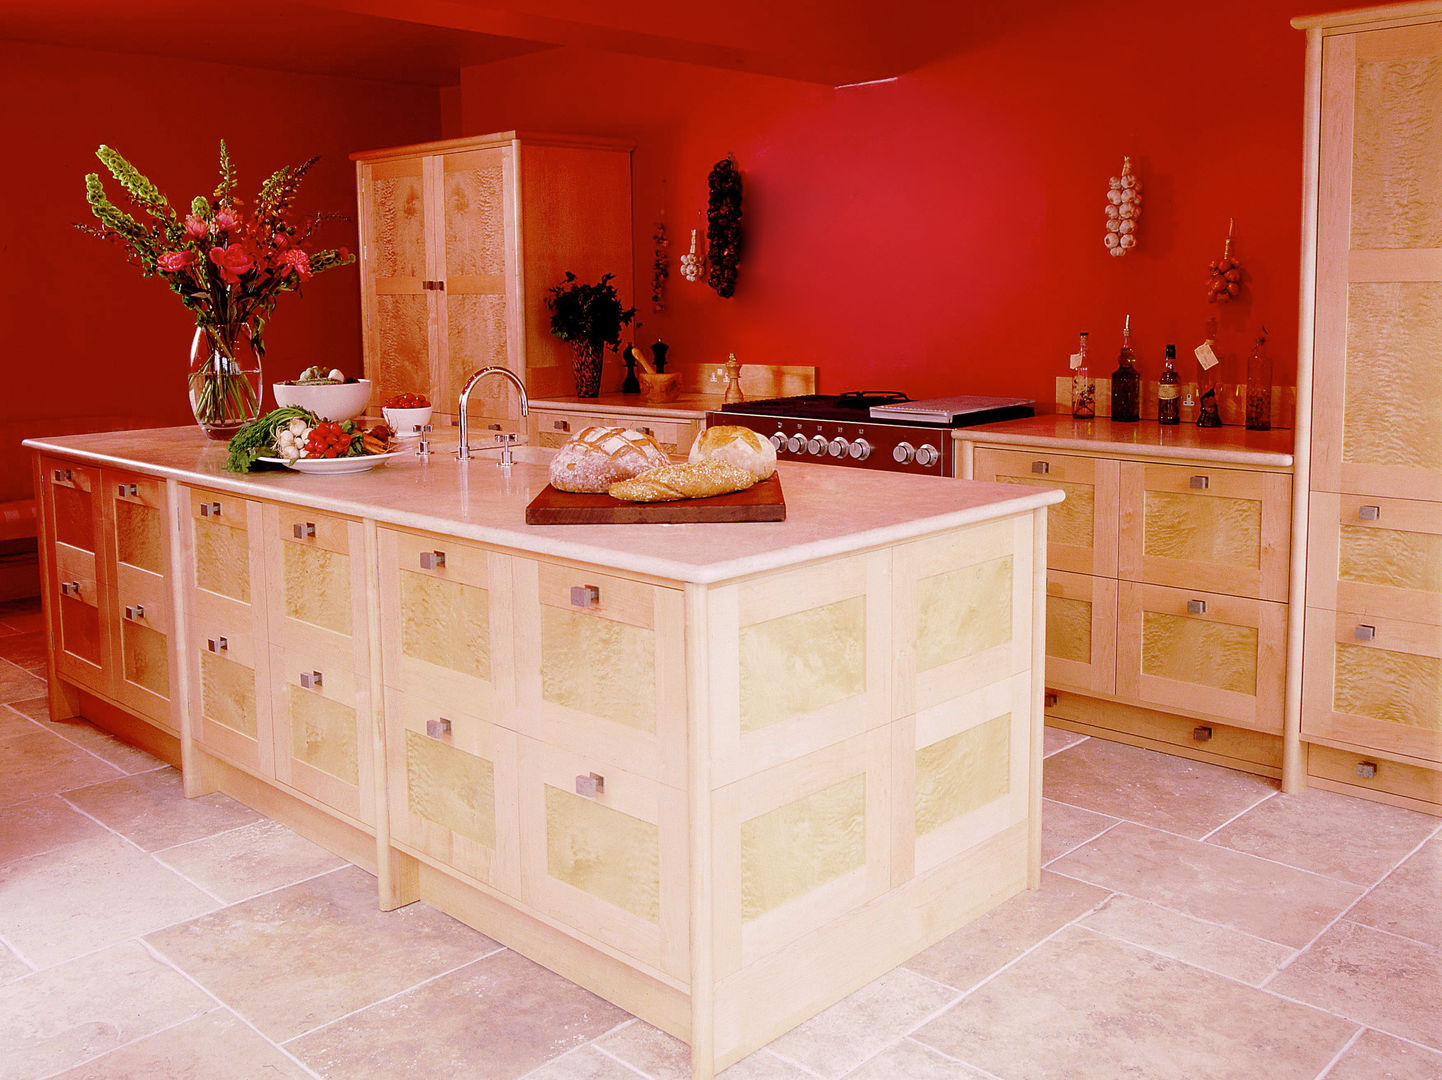 Quilted Maple Kitchen with Red Wall designed and made by Tim Wood Tim Wood Limited Кухня в стиле модерн Шкафы и полки